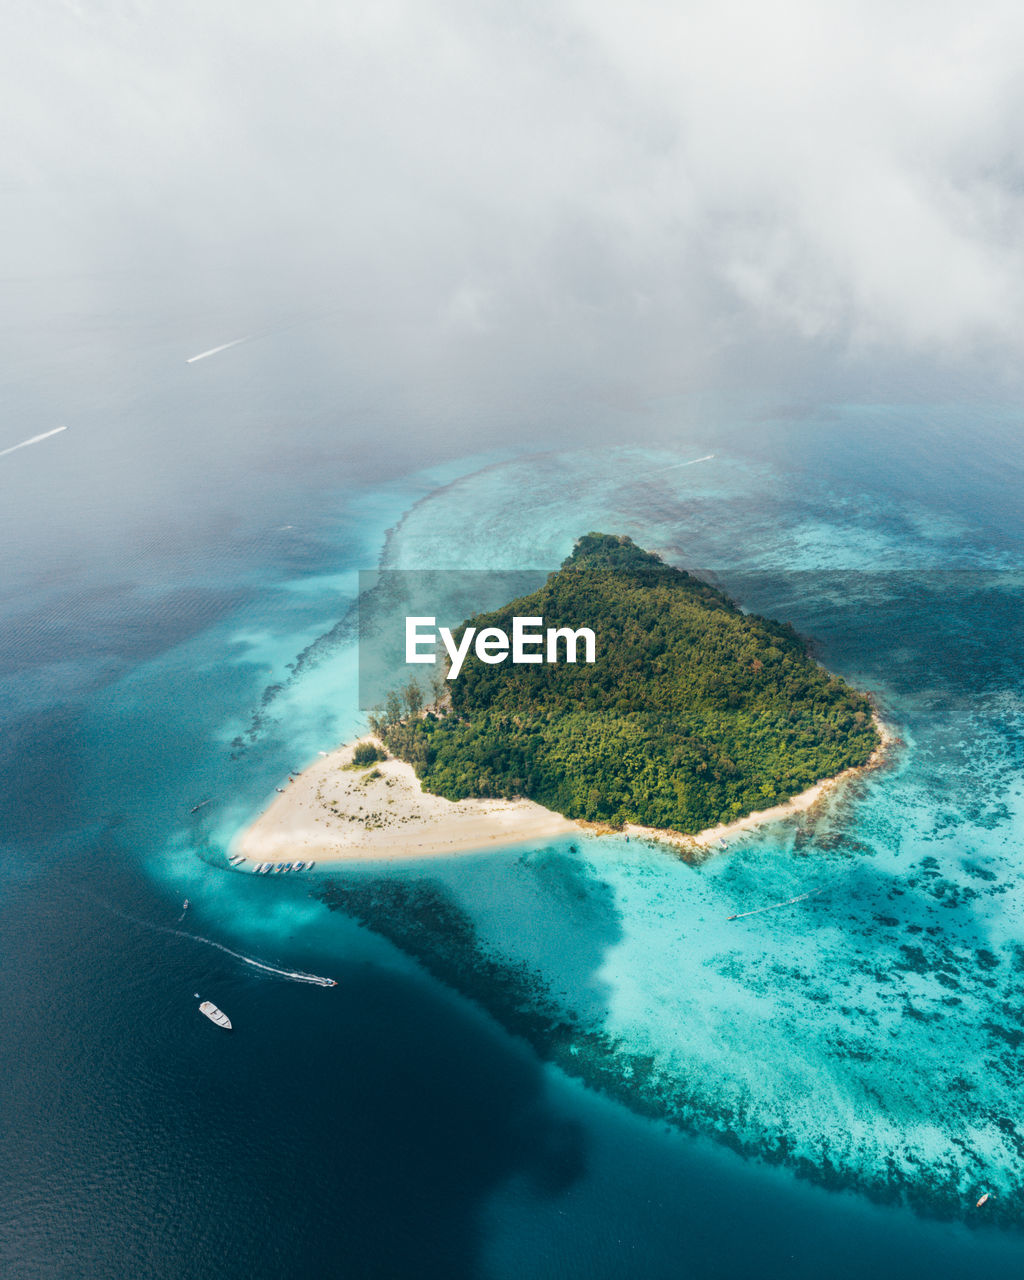 Drone view of an island in thailand